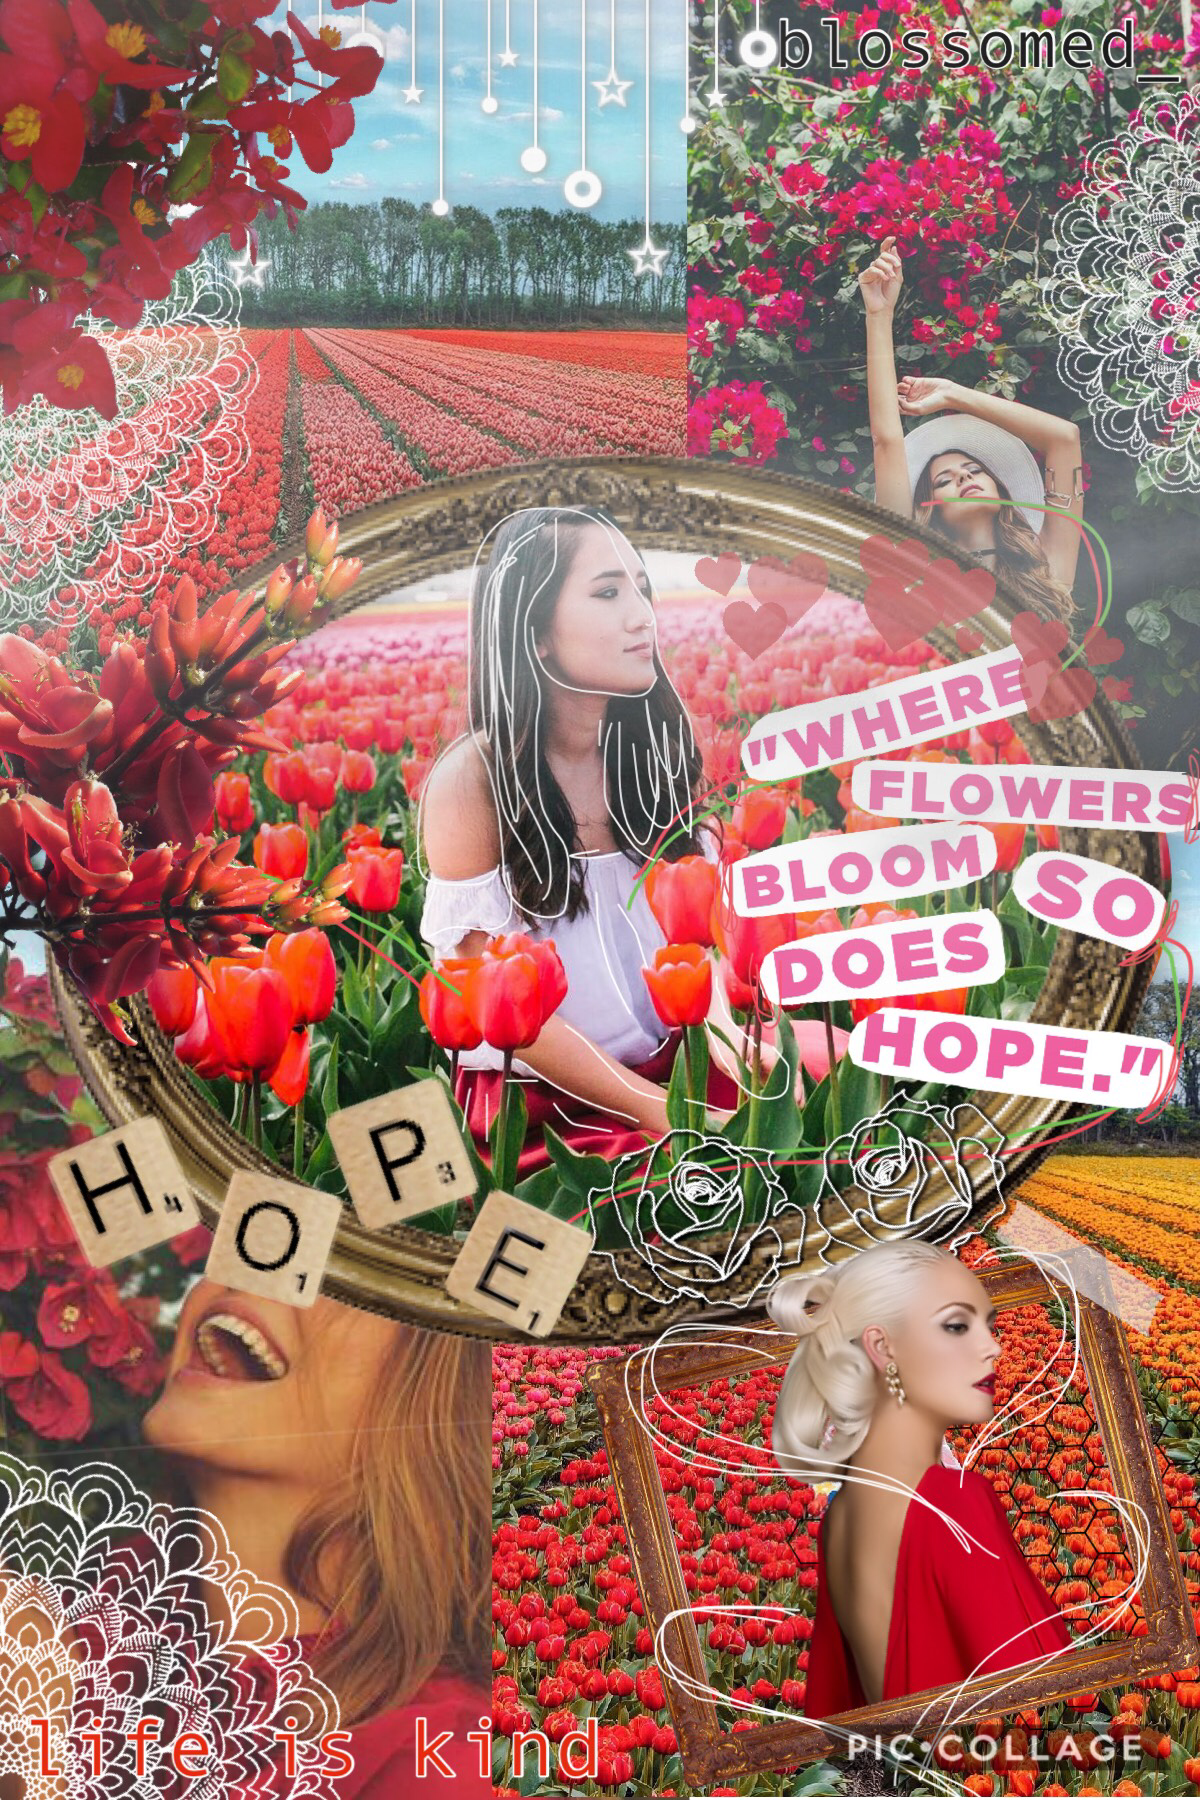 Thanks for all the kind comments on my first collage! Hope you like this ✨ 🌹❤️